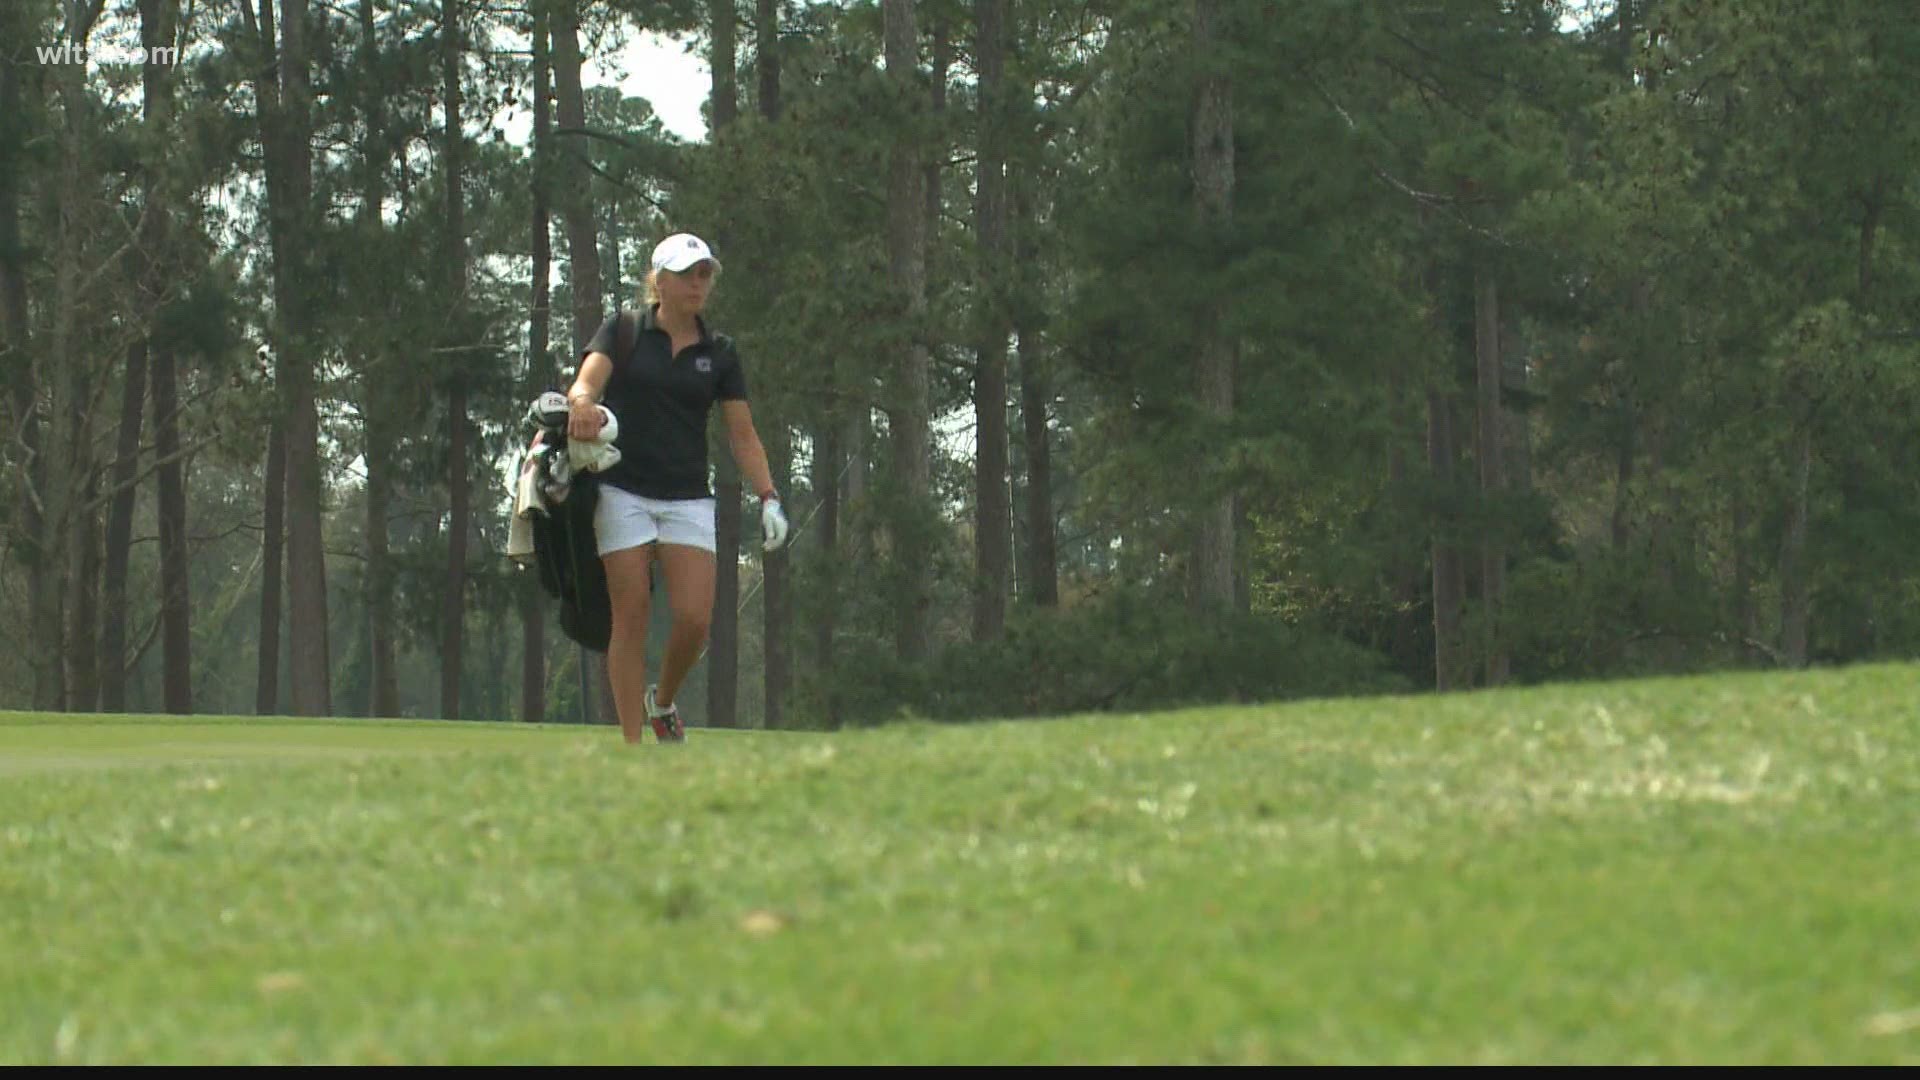 The South Carolina women's golf team will tee off next week in the Louisville regional as the number one overall seed in the NCAA Tournament.